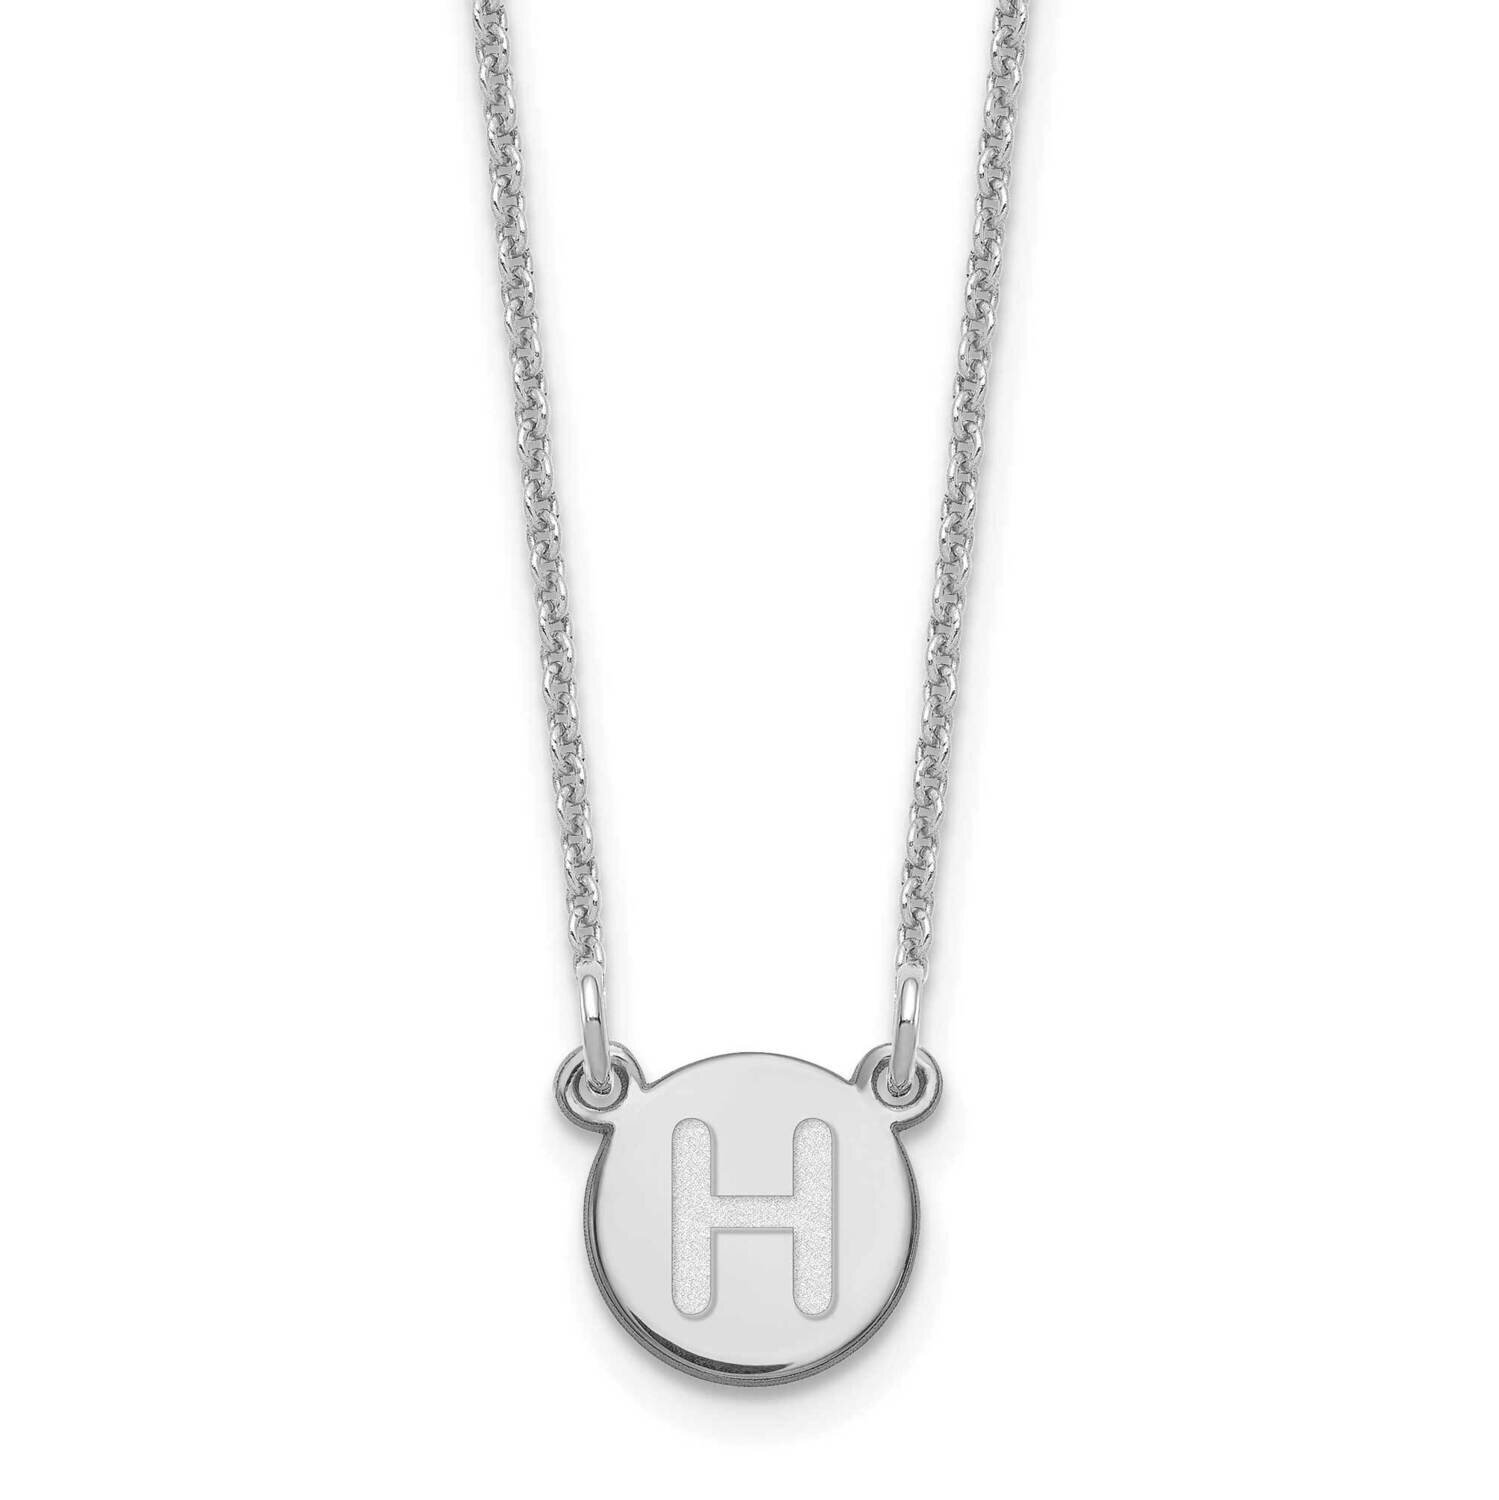 Tiny Circle Block Initial Letter H Necklace 14k White Gold XNA722W/H